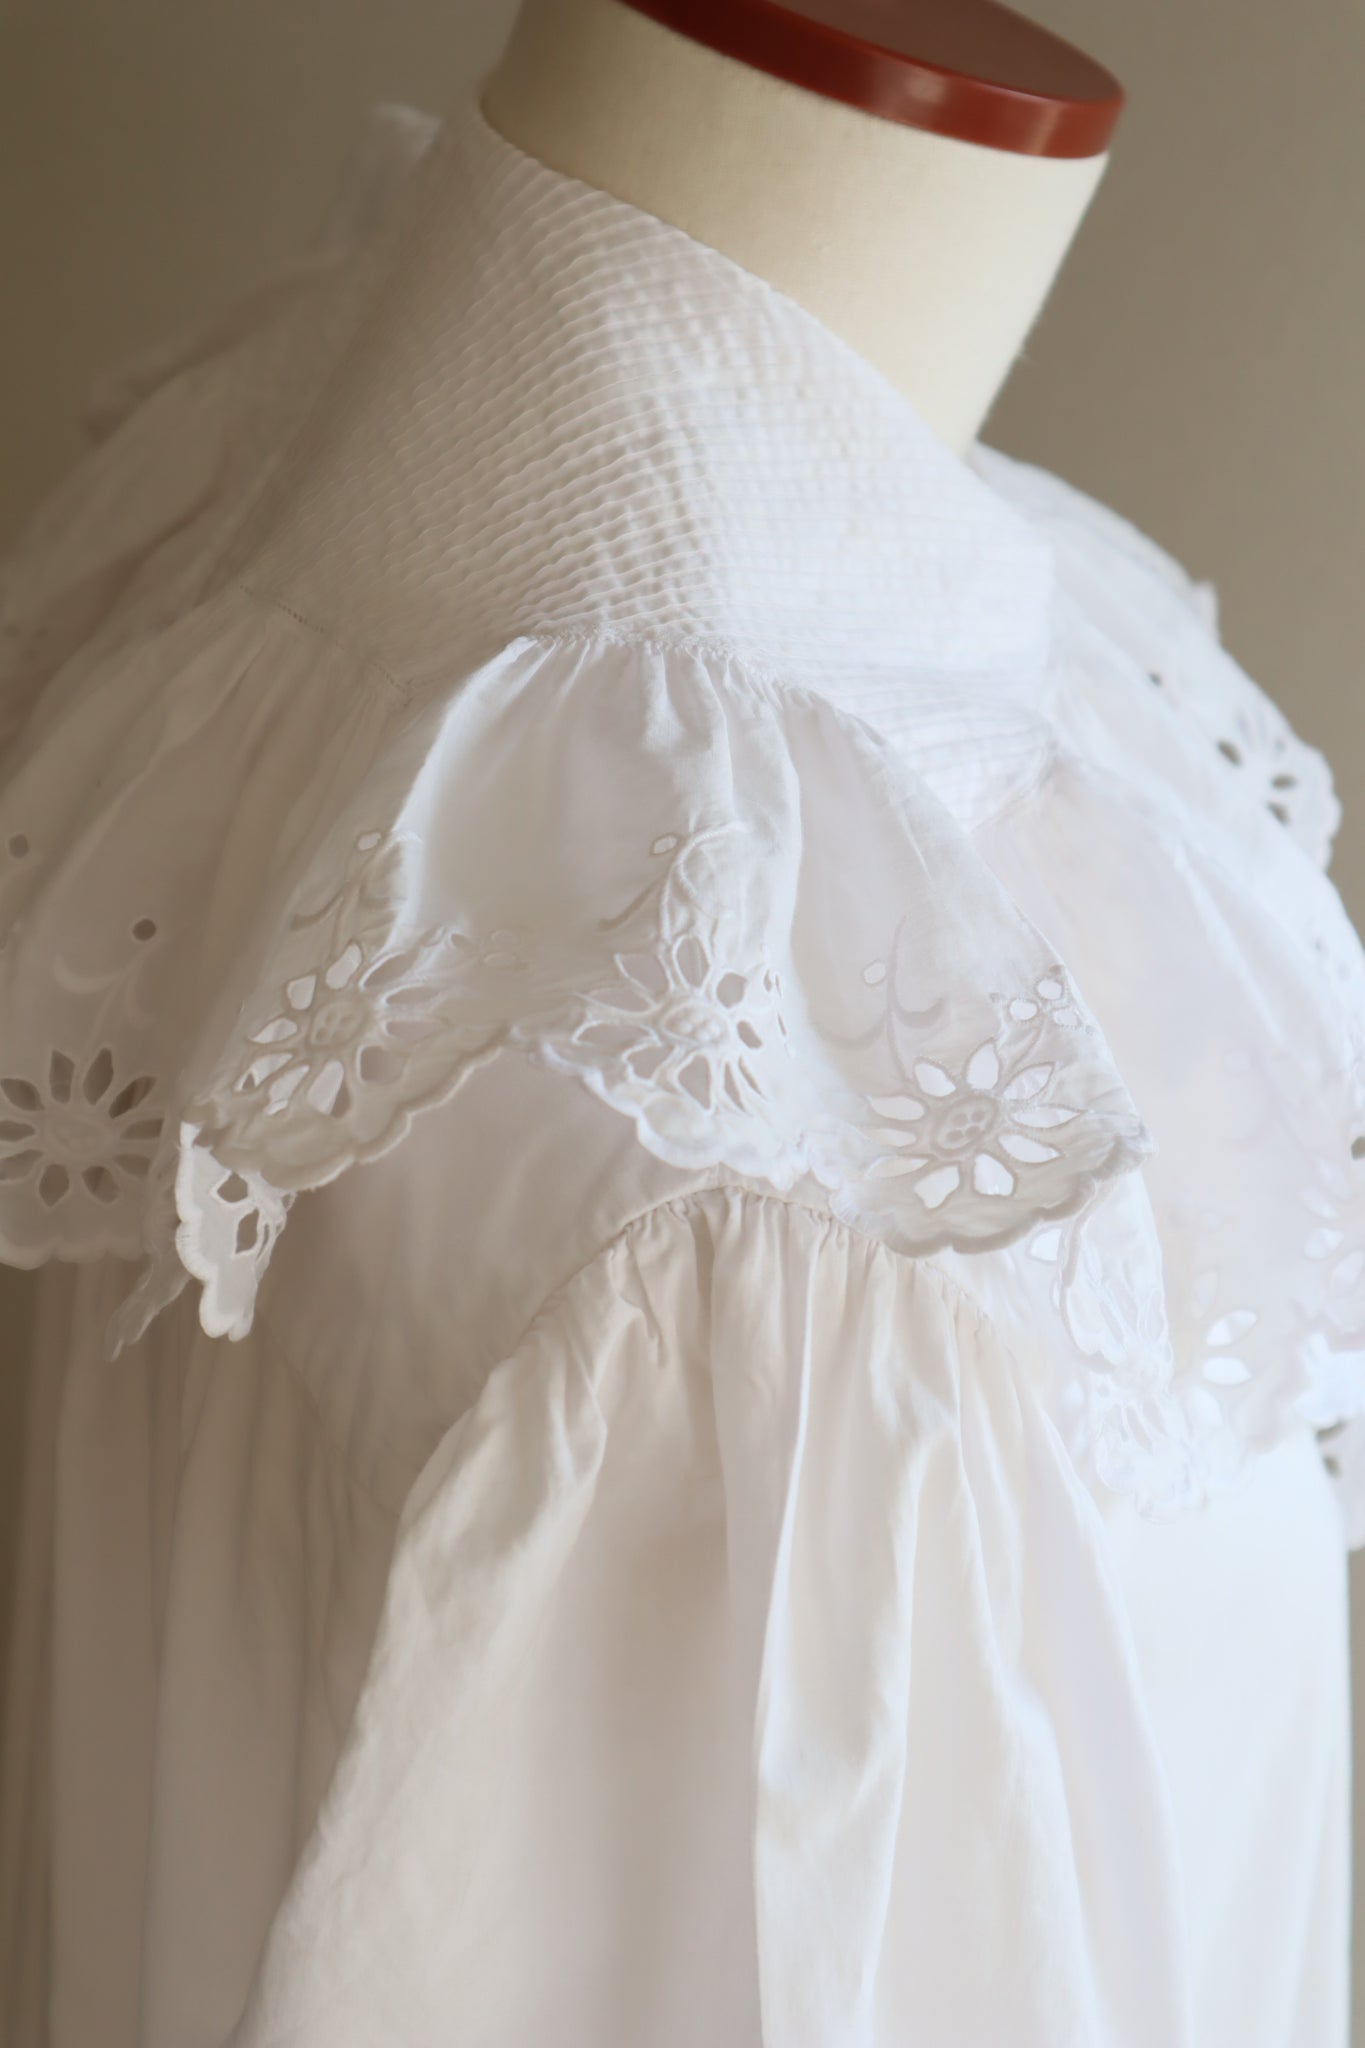 1900s Frilled Flower Cutwork Lace Pin Tuck Big Collar White Cotton Dress